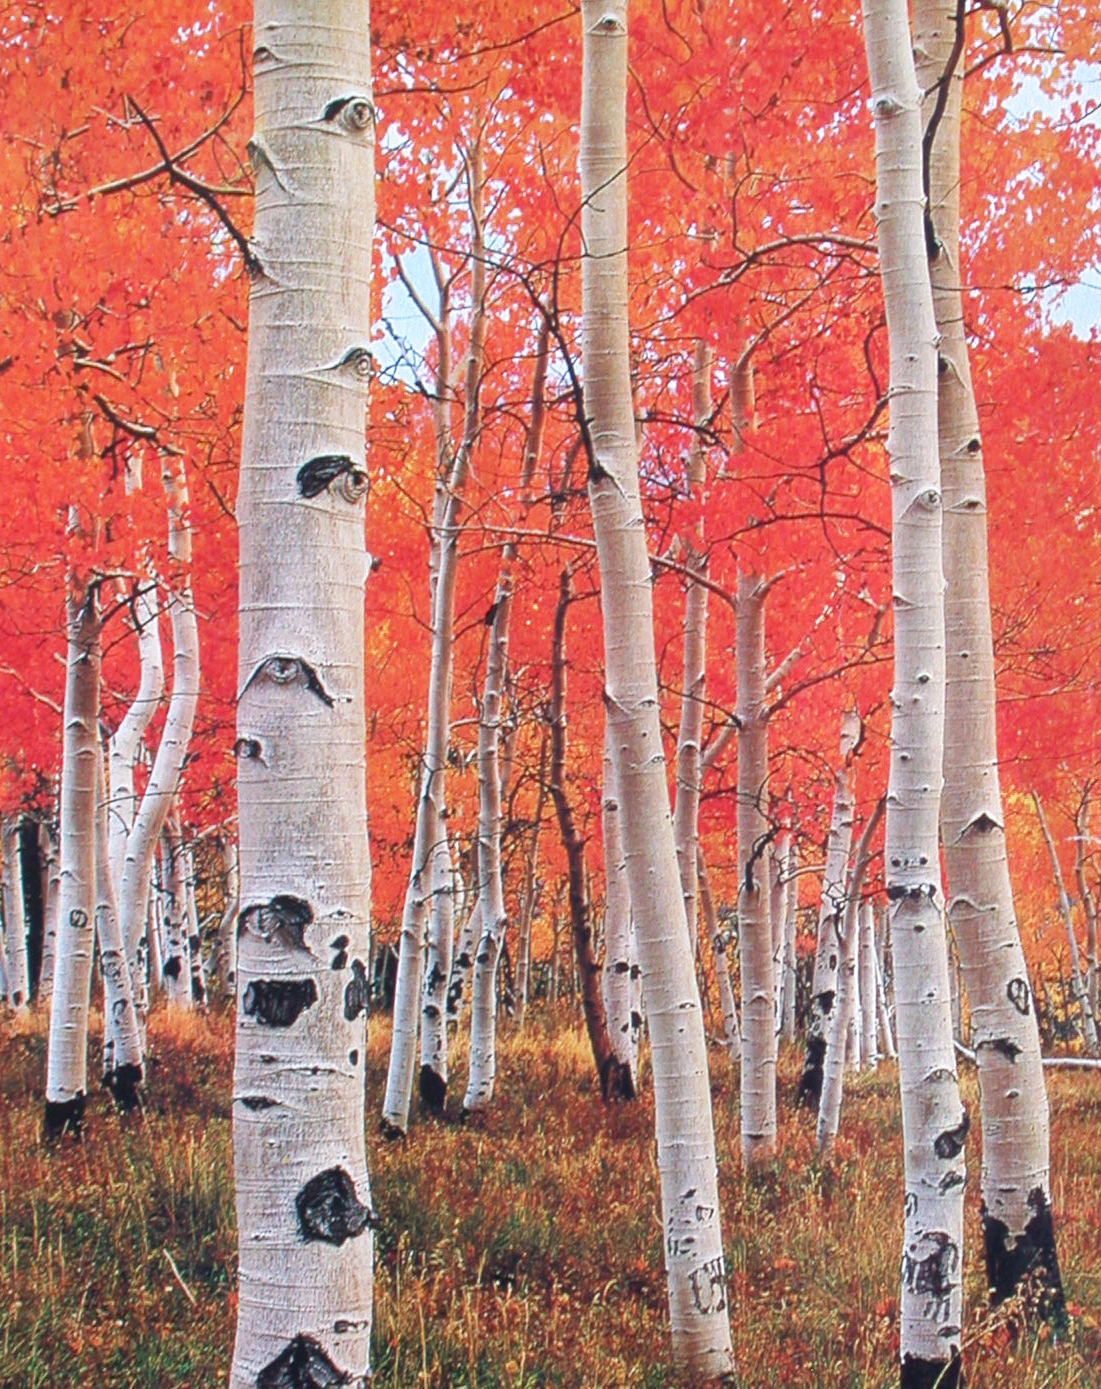 Aspen Trees with Bright Red Leaves